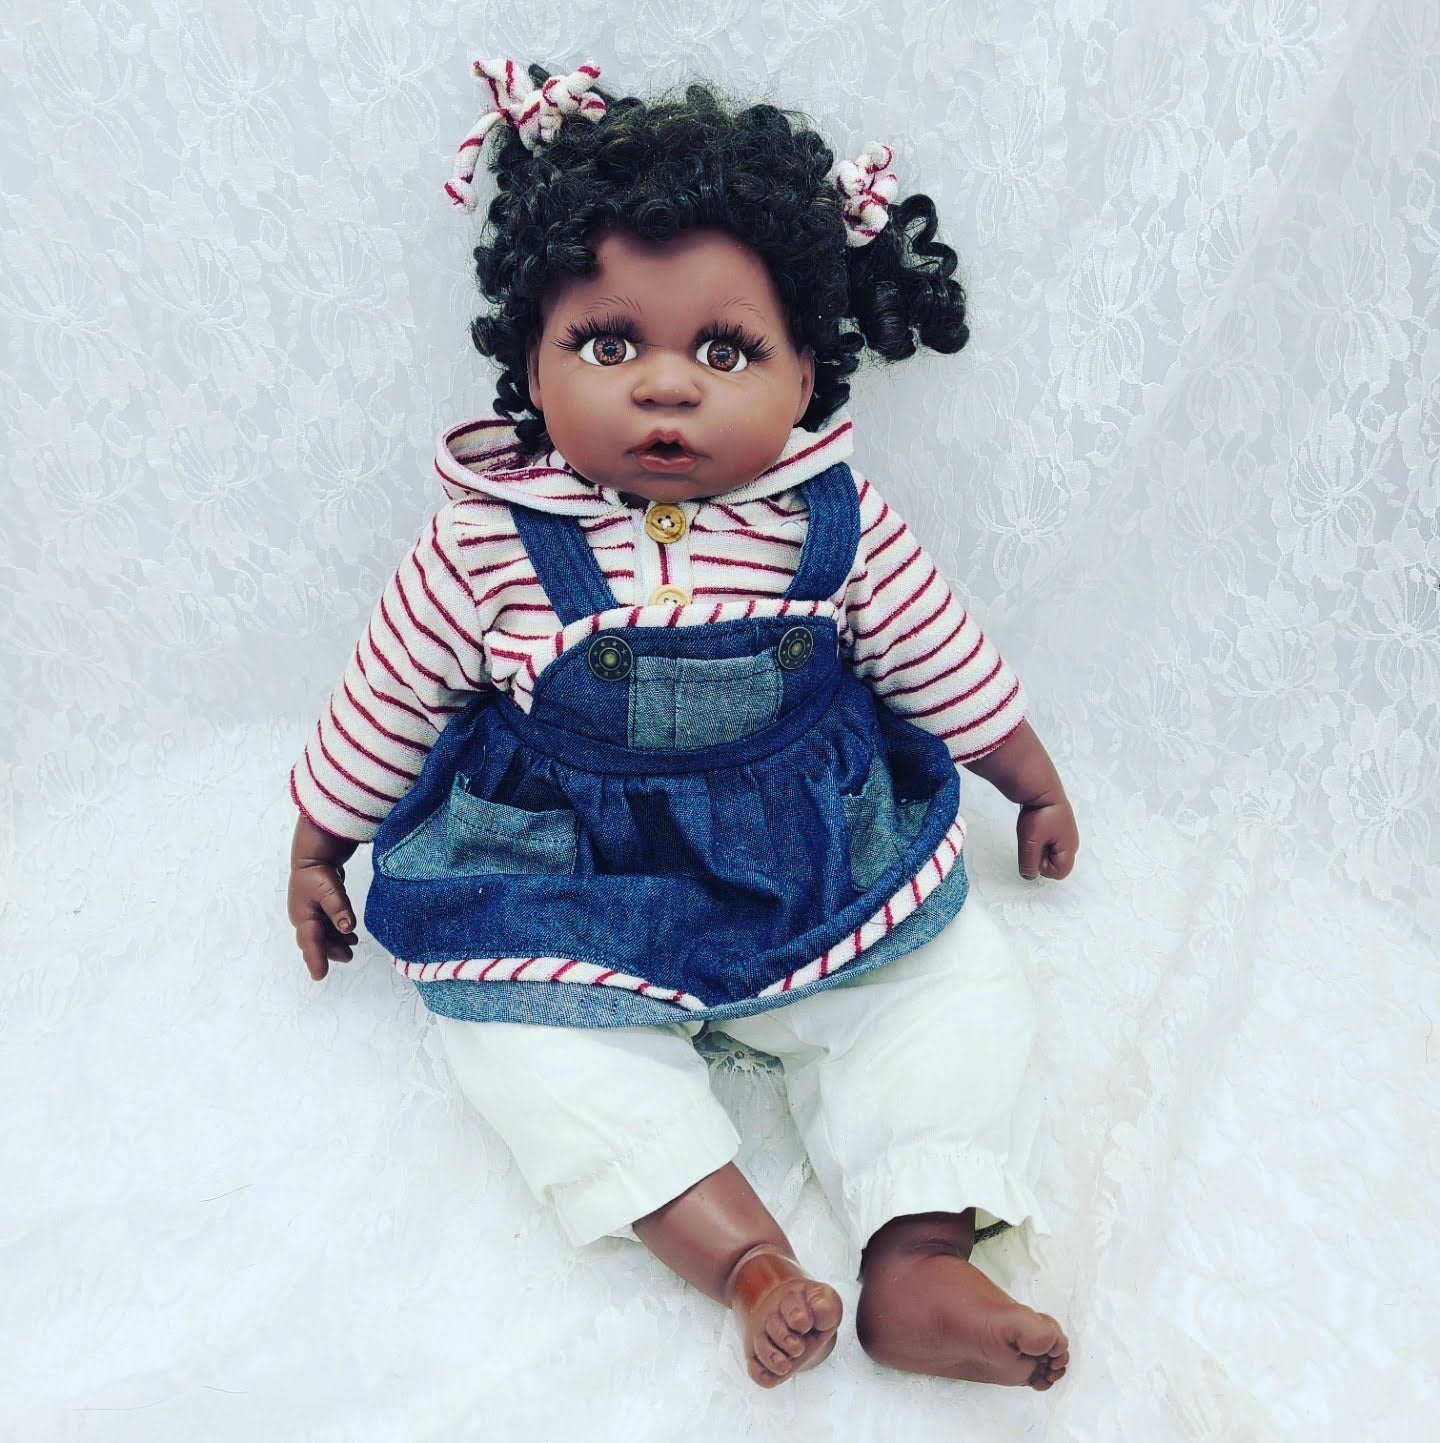 Danya Haunted Doll ~ 23" African American Vinyl Toddler Vessel ~ Paranormal ~ Sweet Girl ~ Thinks She's Bigger Than She Is ~ Wannabe Big Sister